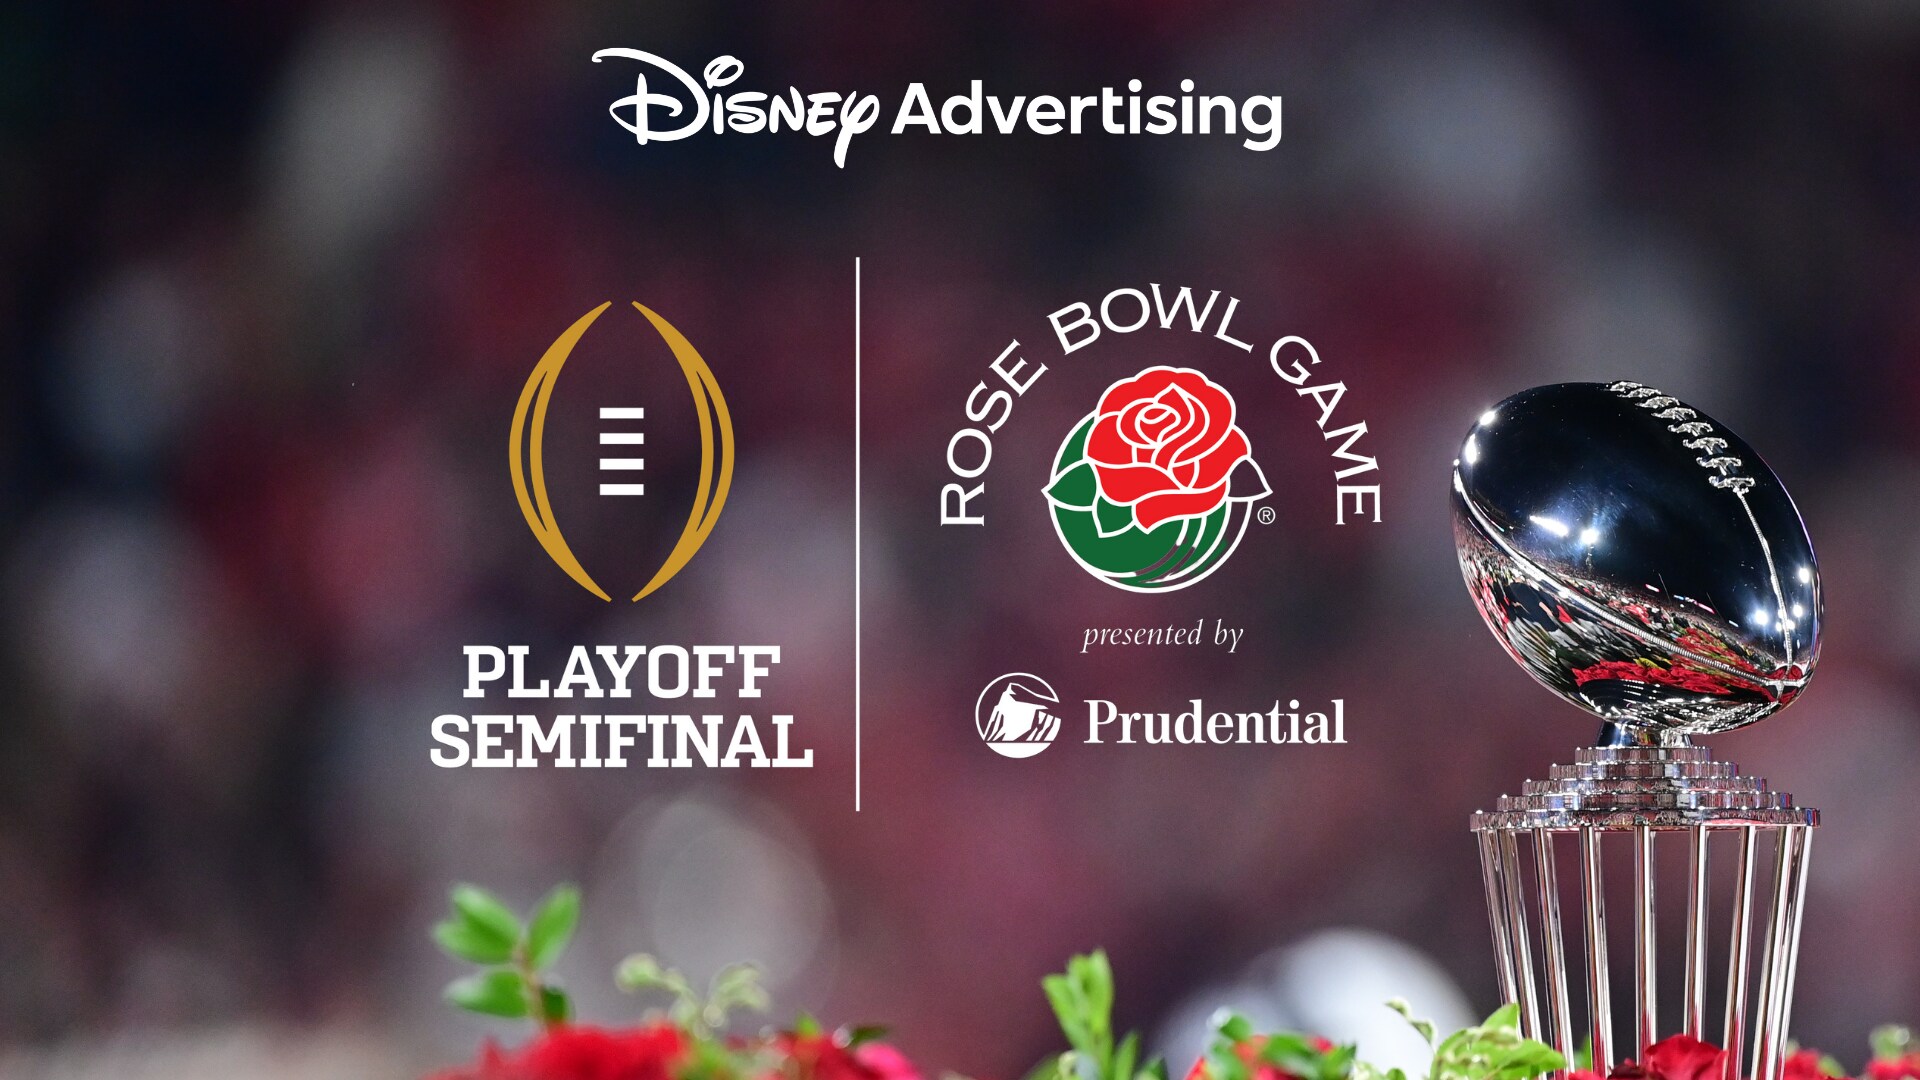 Prudential Signs New Multi-Year Agreement with Disney Advertising as Presenting Sponsor of Historic Rose Bowl Game Through 2025-26